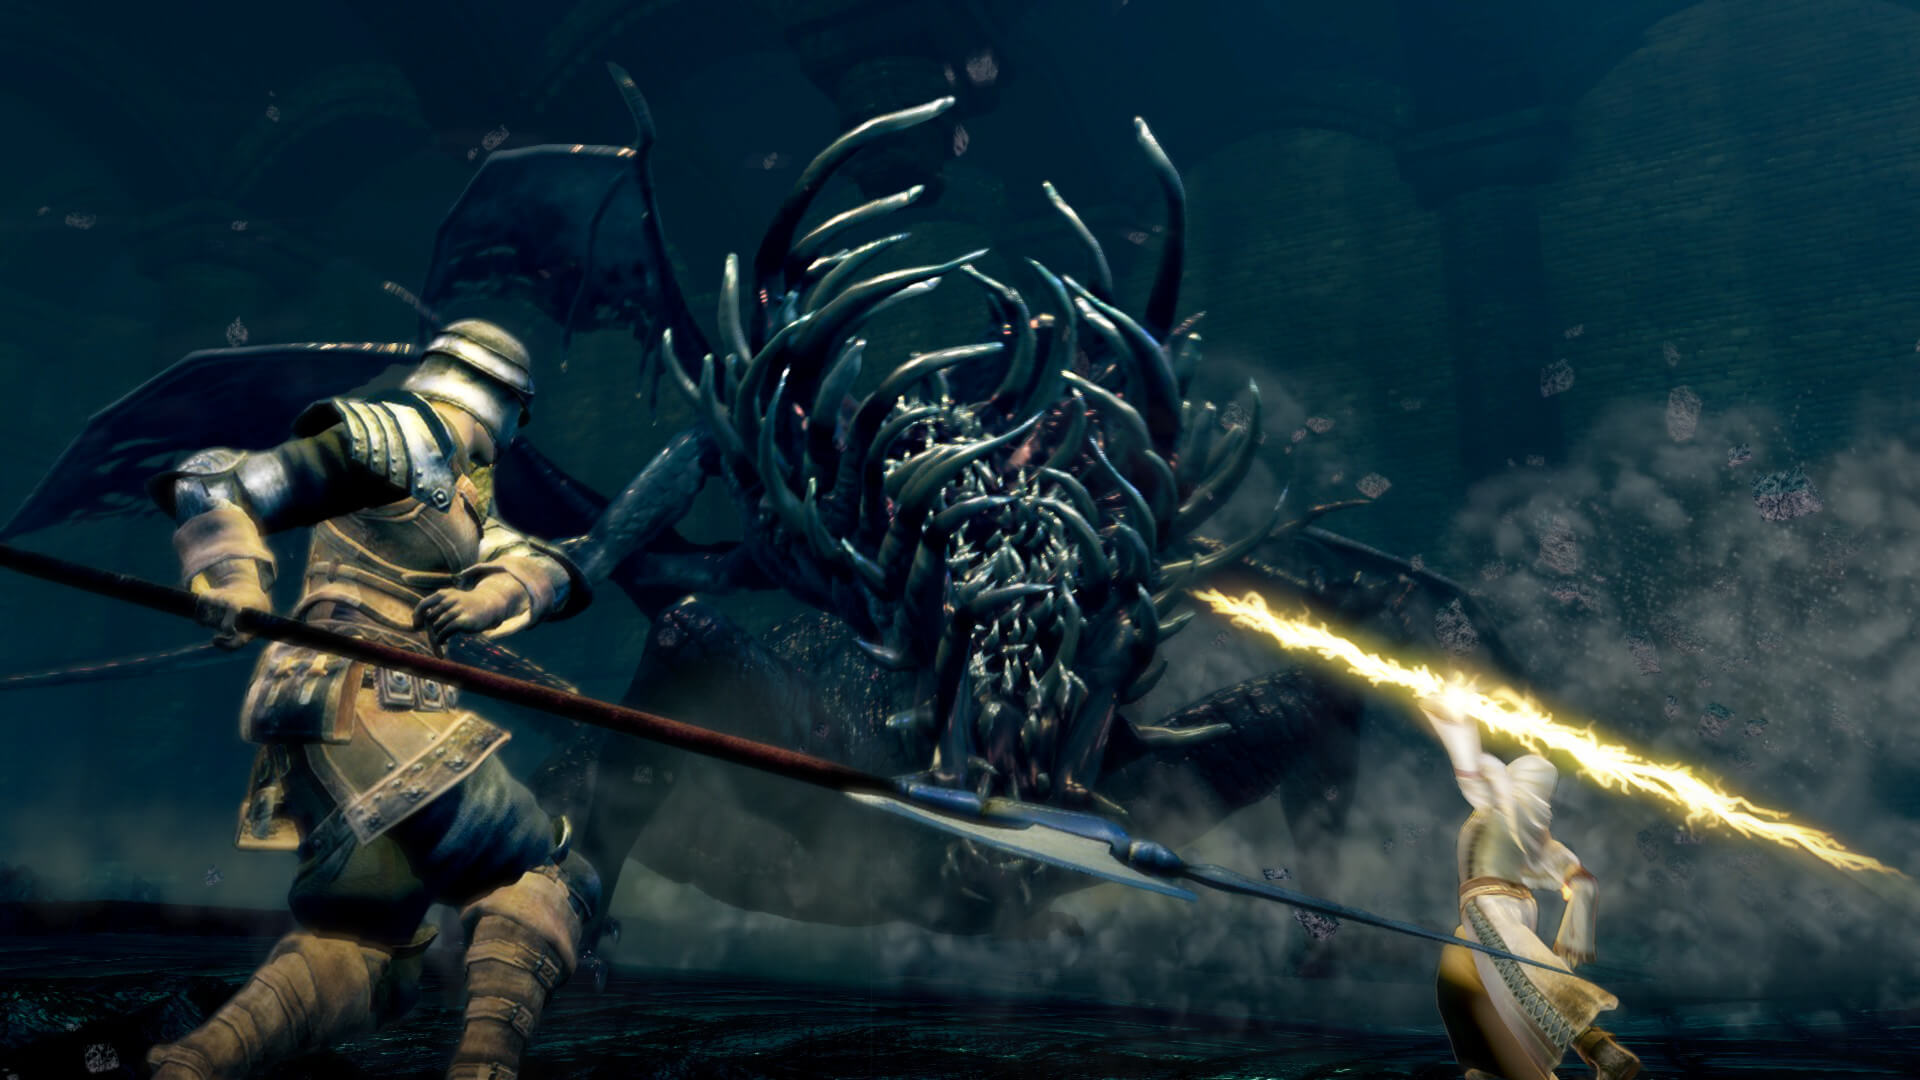 The player and an ally battling the Gaping Dragon boss in Dark Souls Remastered